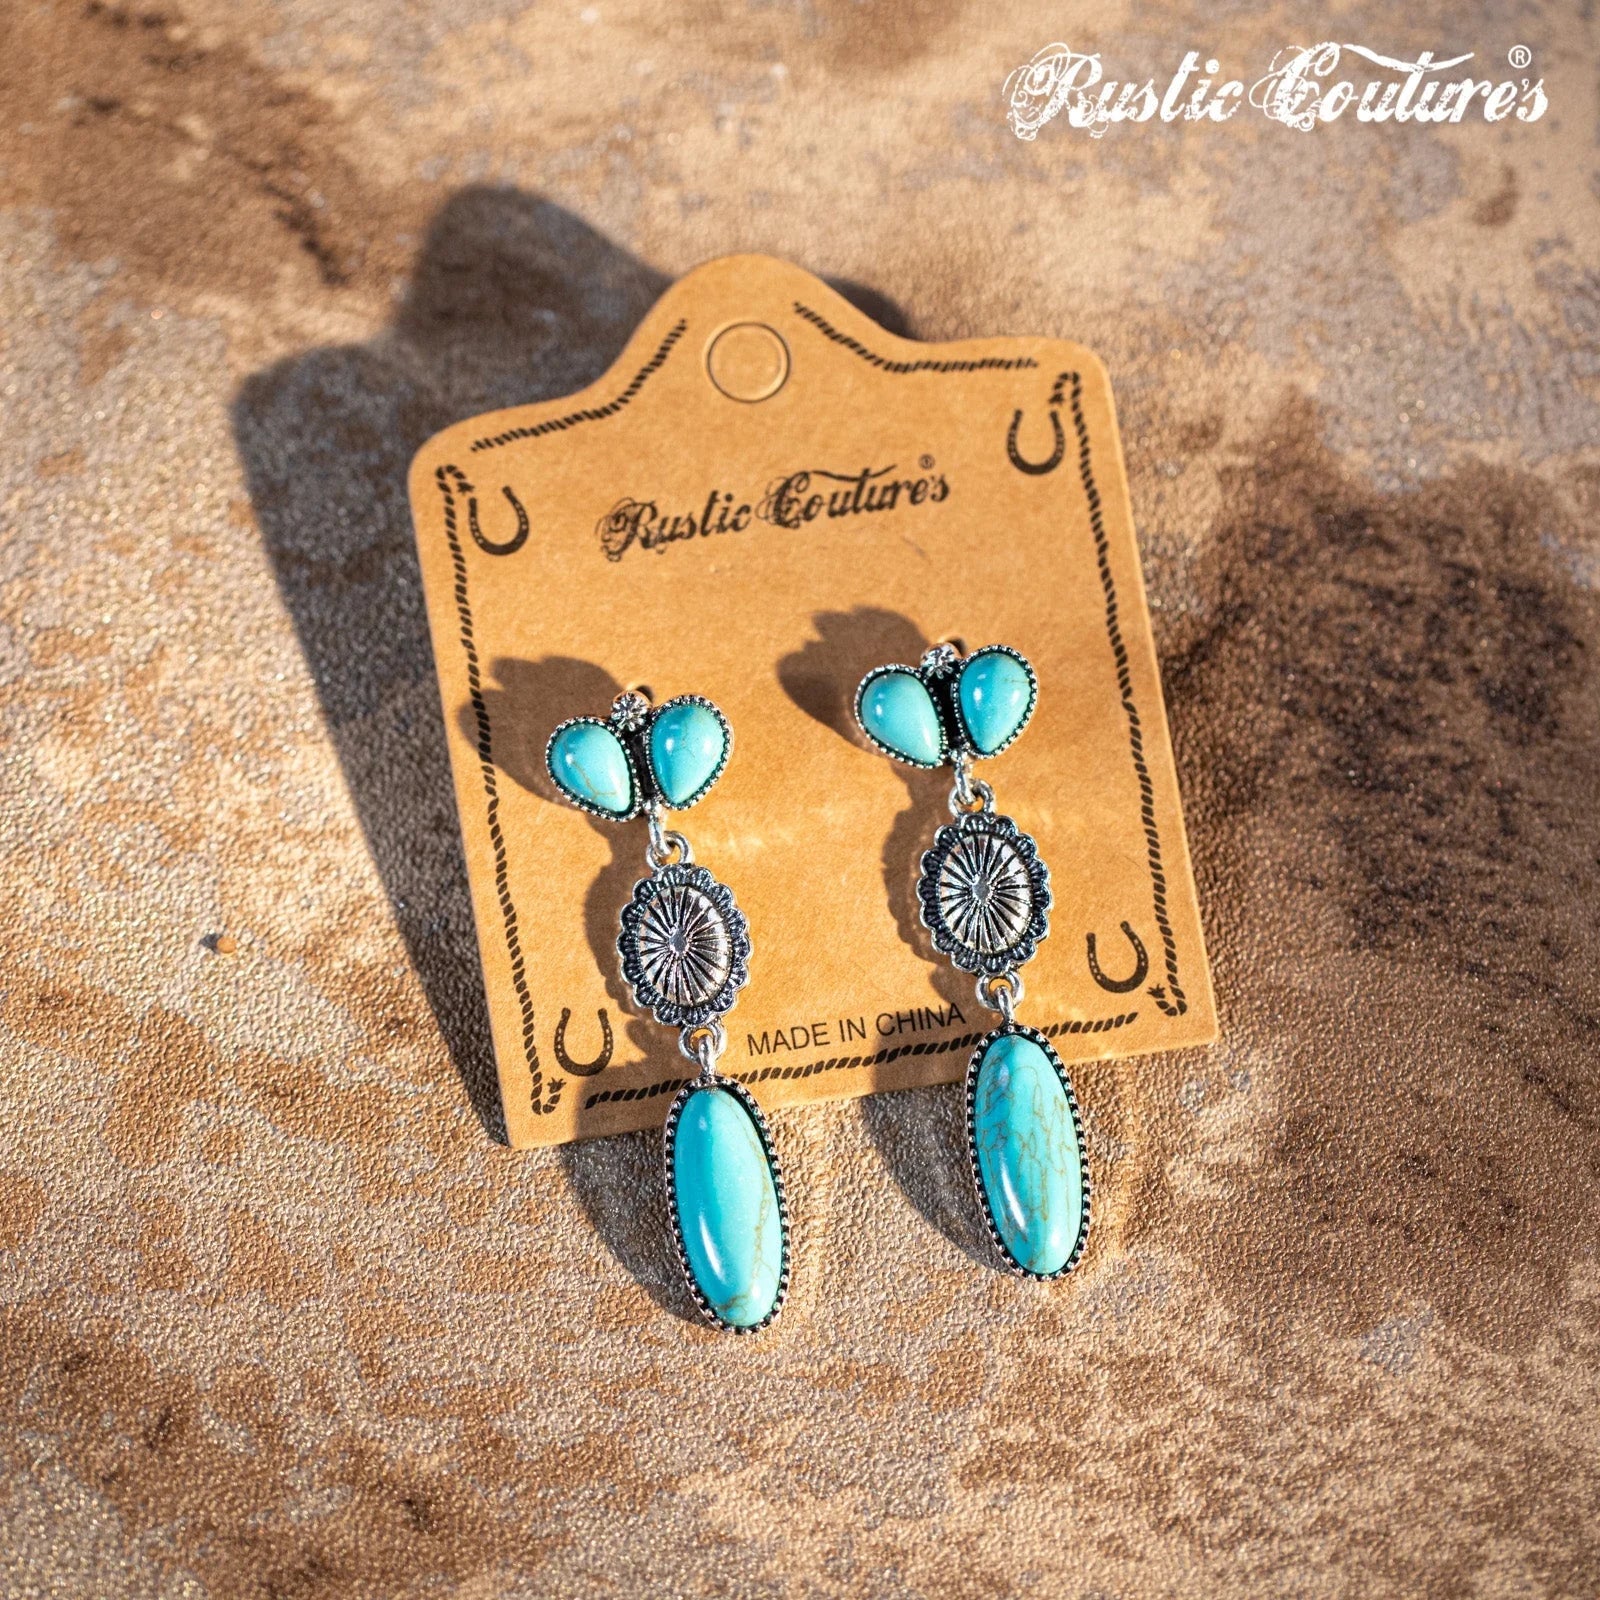 Rustic Couture Navajo Oval Concho Nature Turquoise Dangling Earrings Turquoise